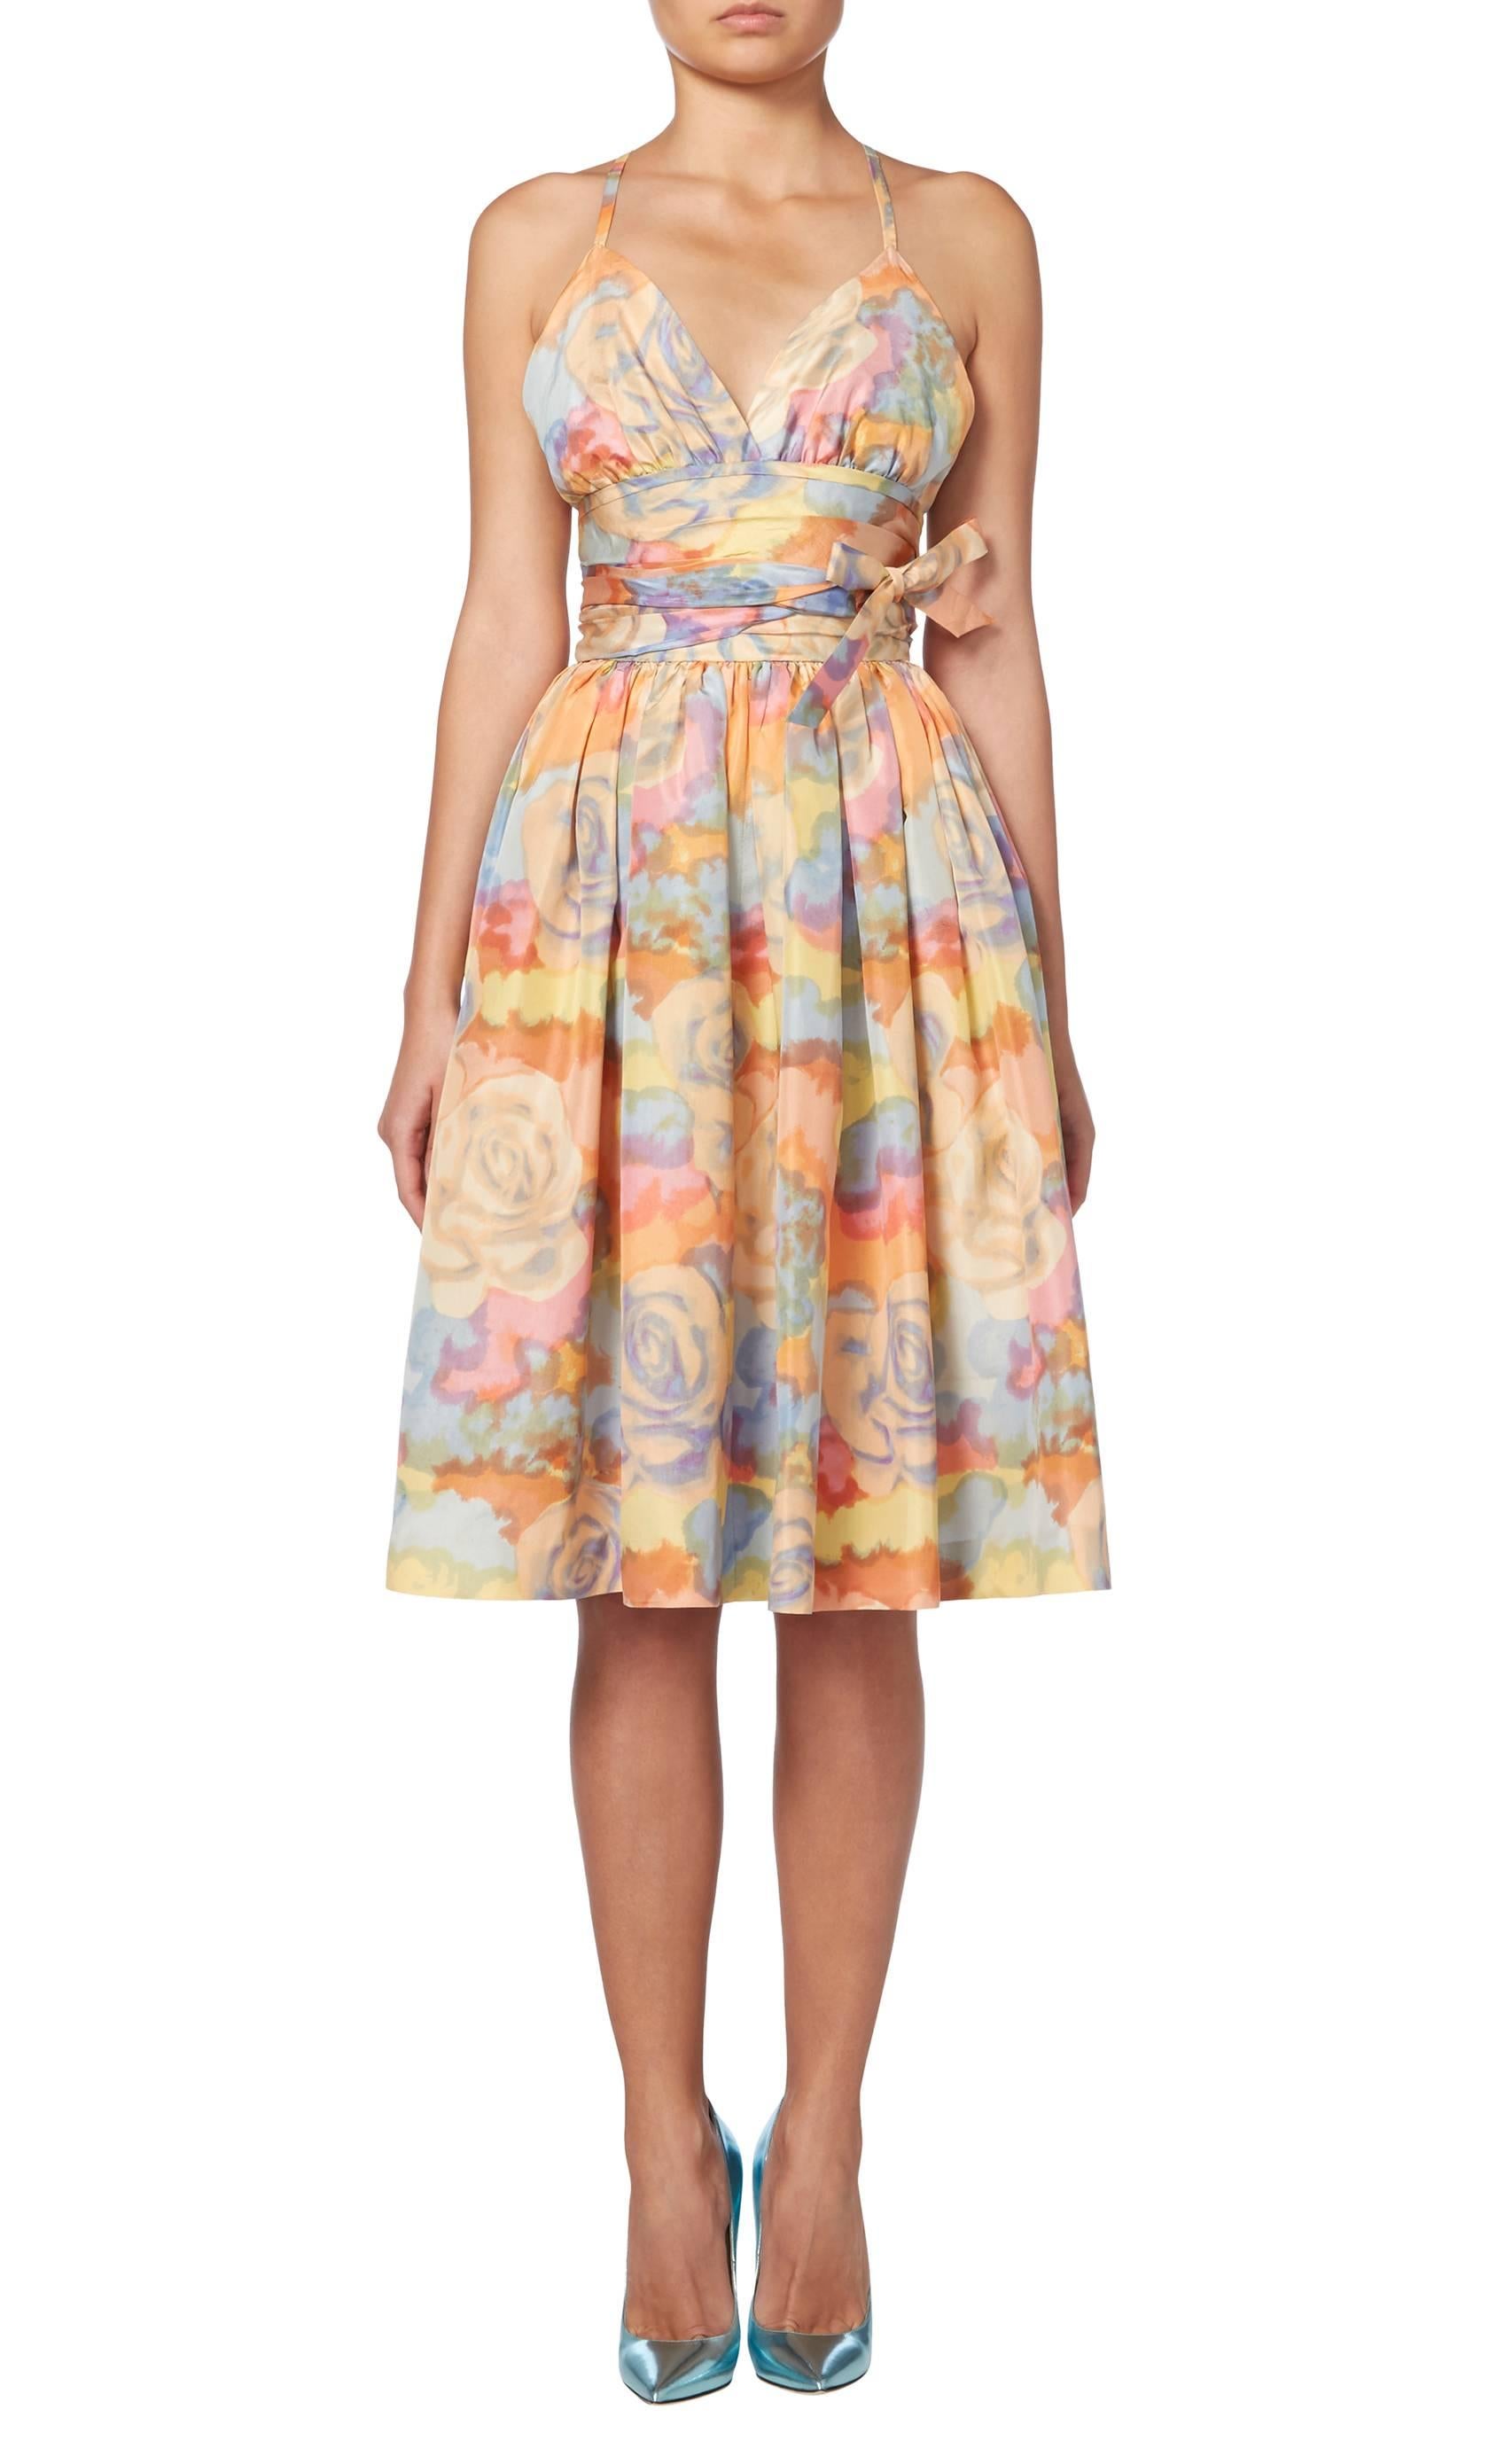 A simply stunning summer dress, this Norman Norell piece is perfect for garden parties and cocktails. Constructed in pastel coloured floral print silk, the dress features a crossover back and full skirt, while the waist is defined with a wide band